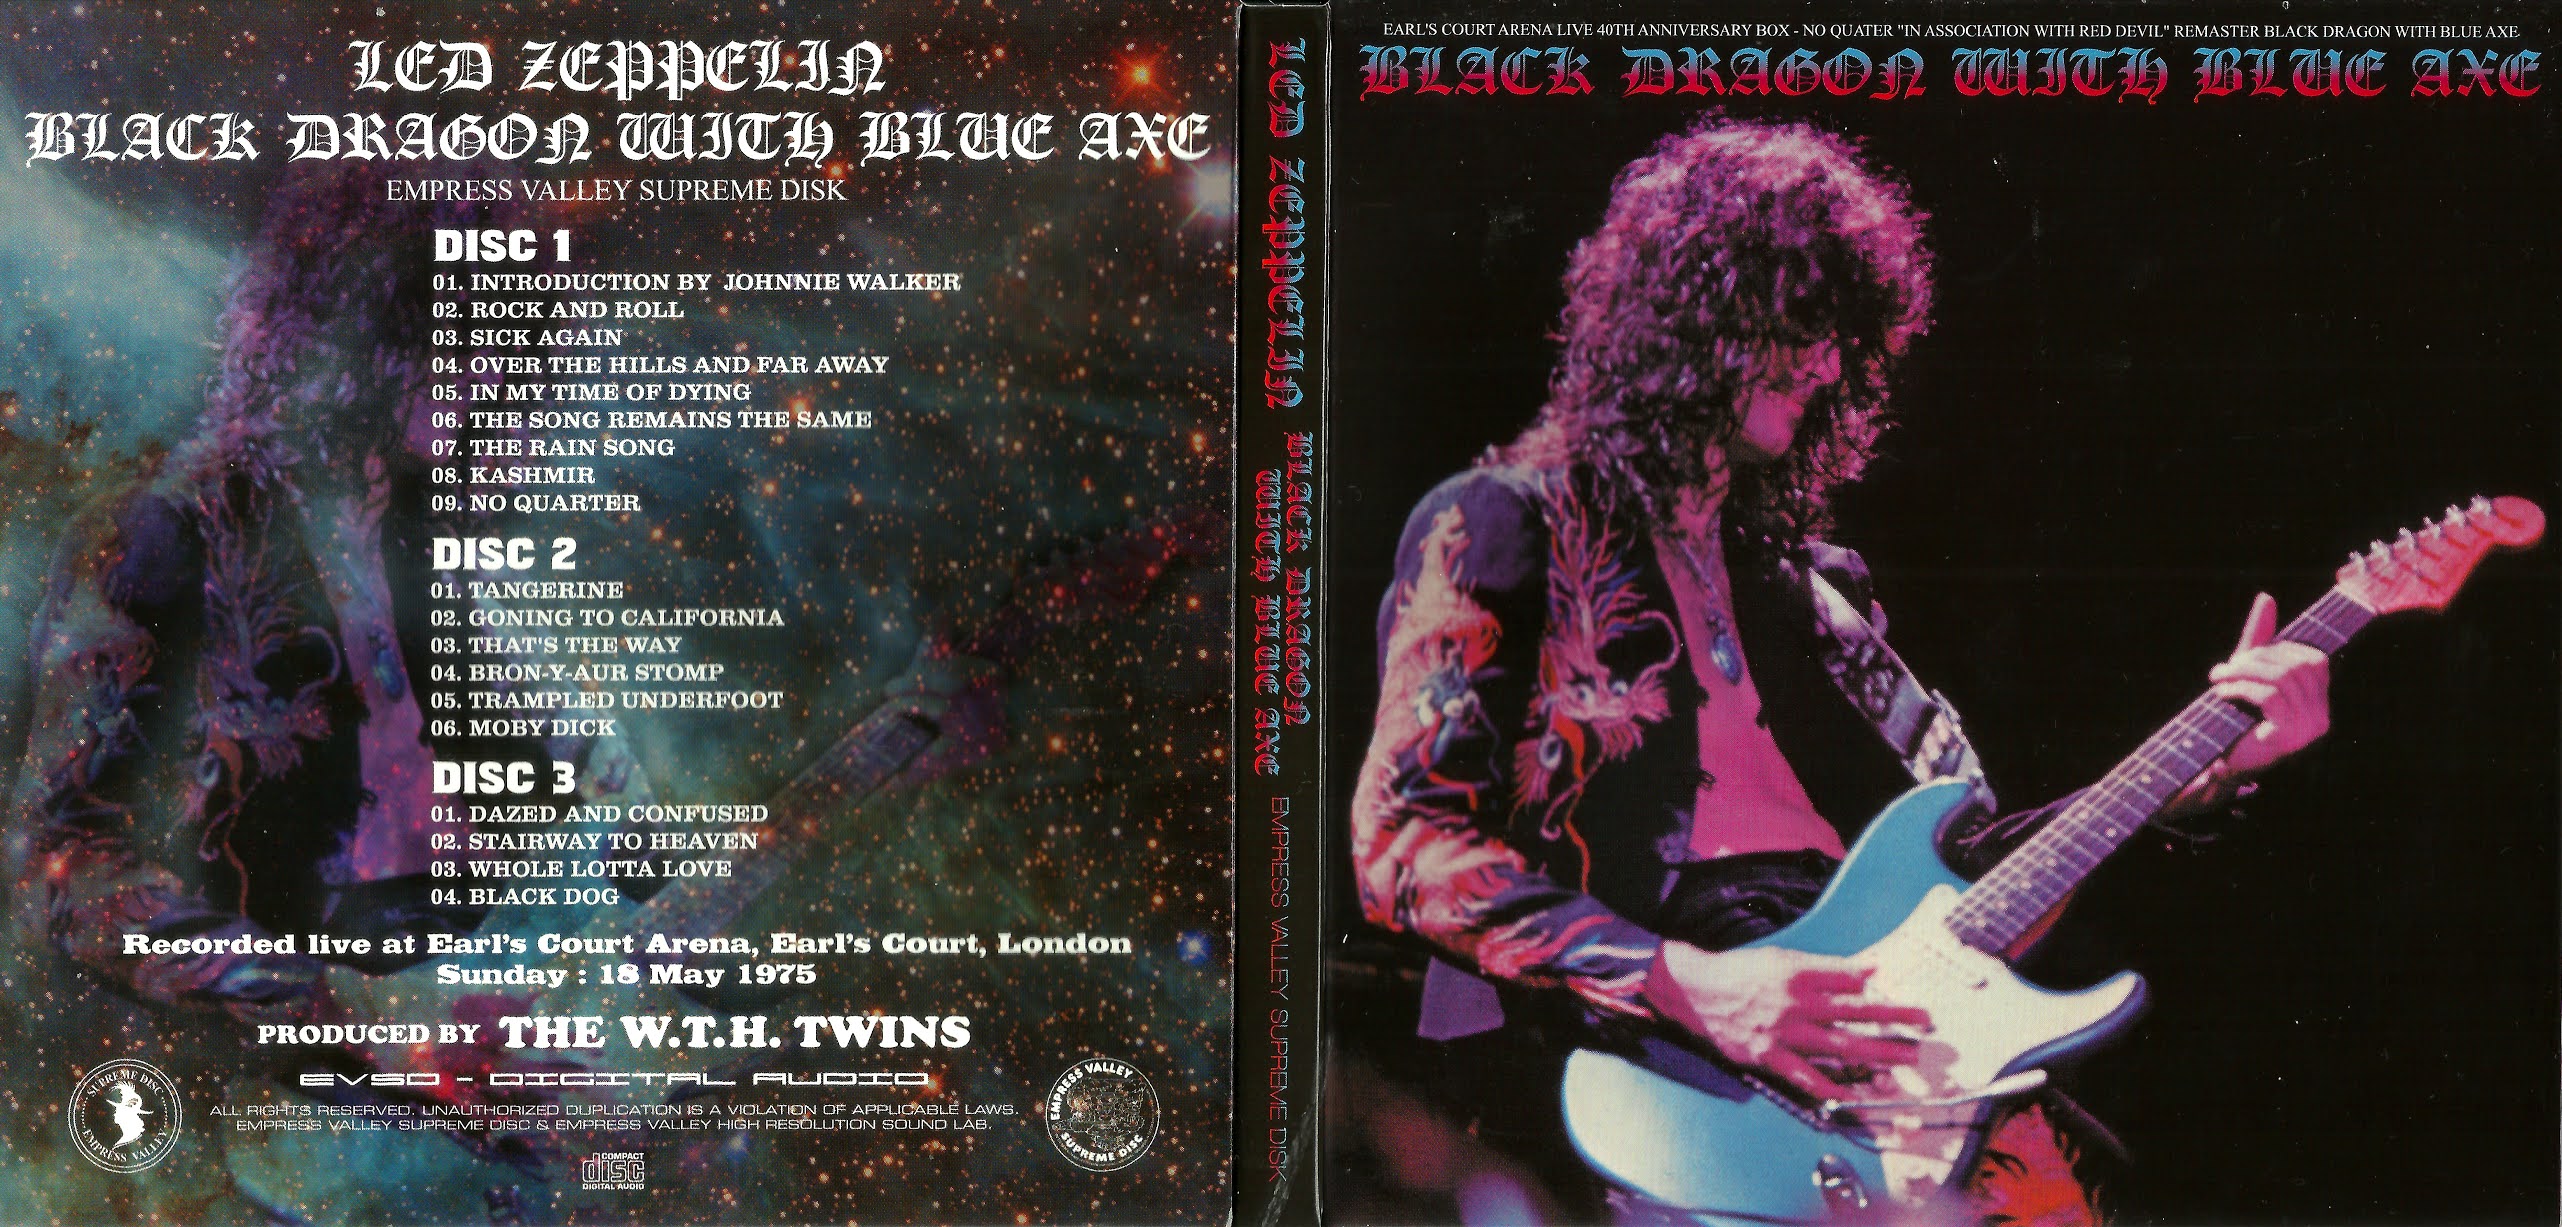 Long Live Led Zeppelin : 1975.05.18 Black Dragon With Blue Axe 15 